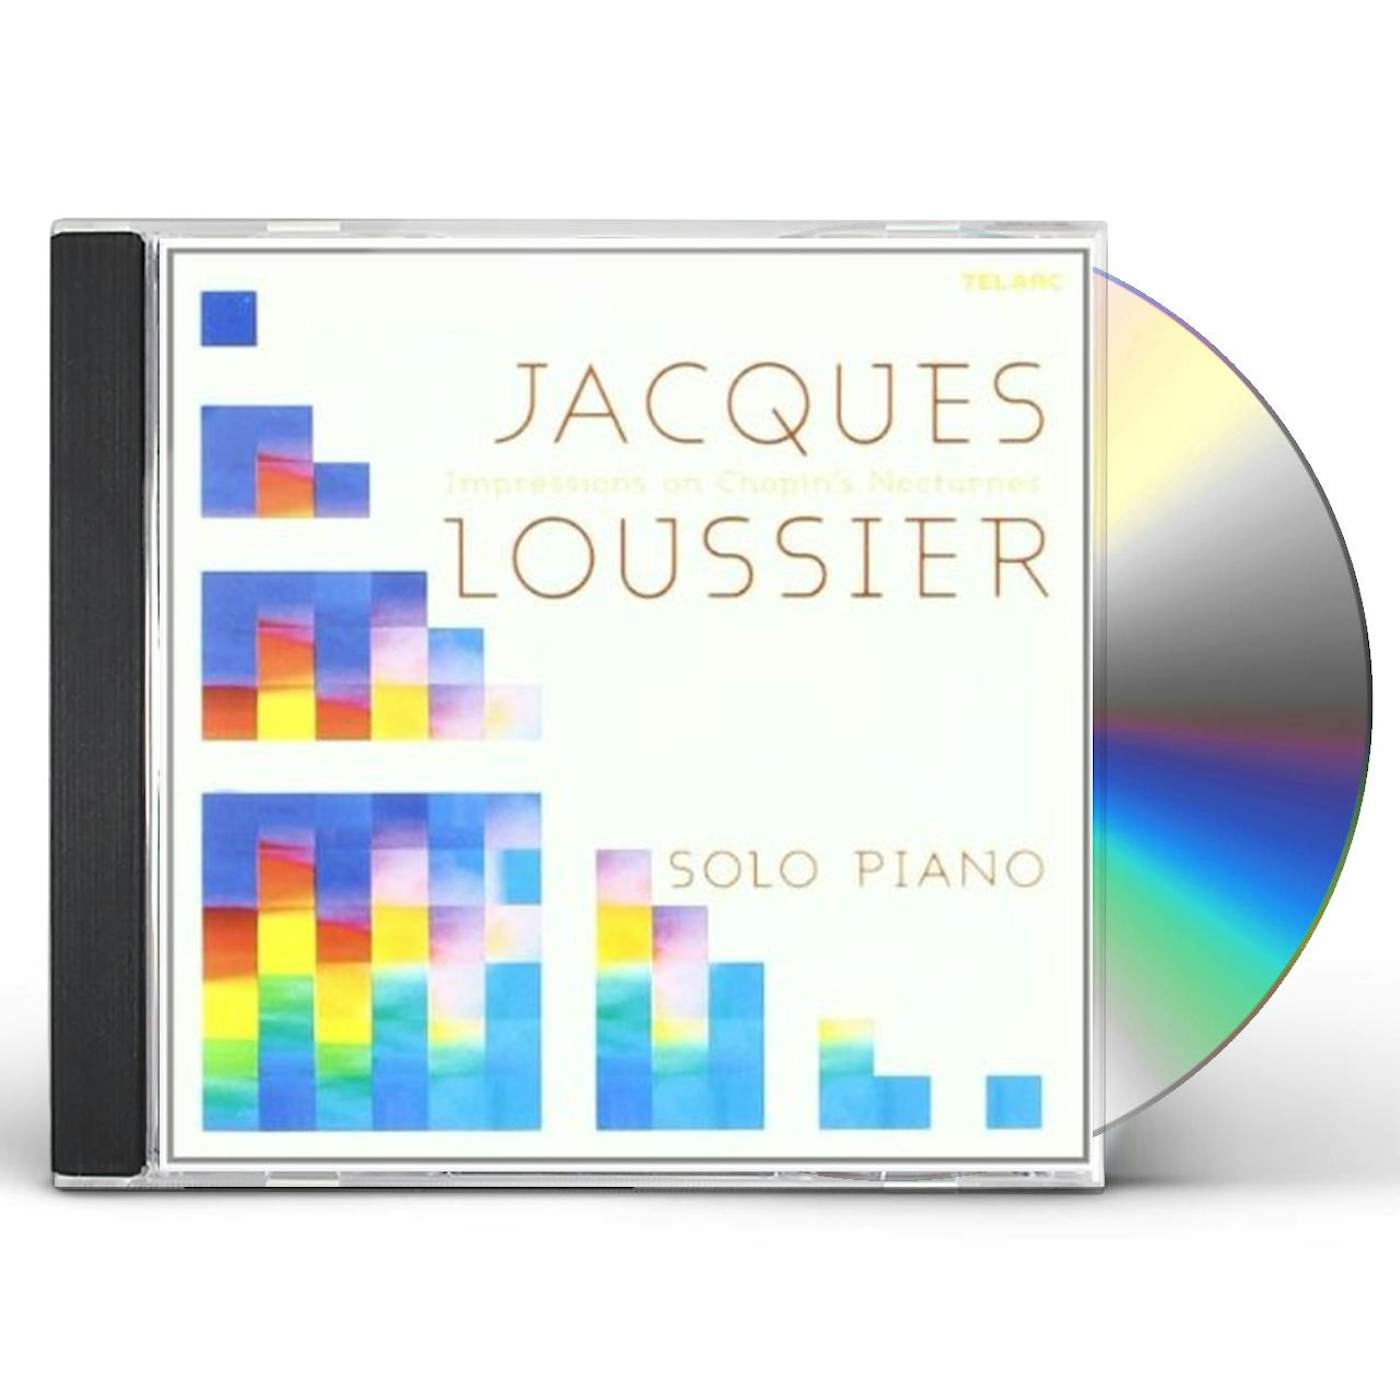 Jacques Loussier IMPRESSIONS OF CHOPIN'S NOCTURNES CD